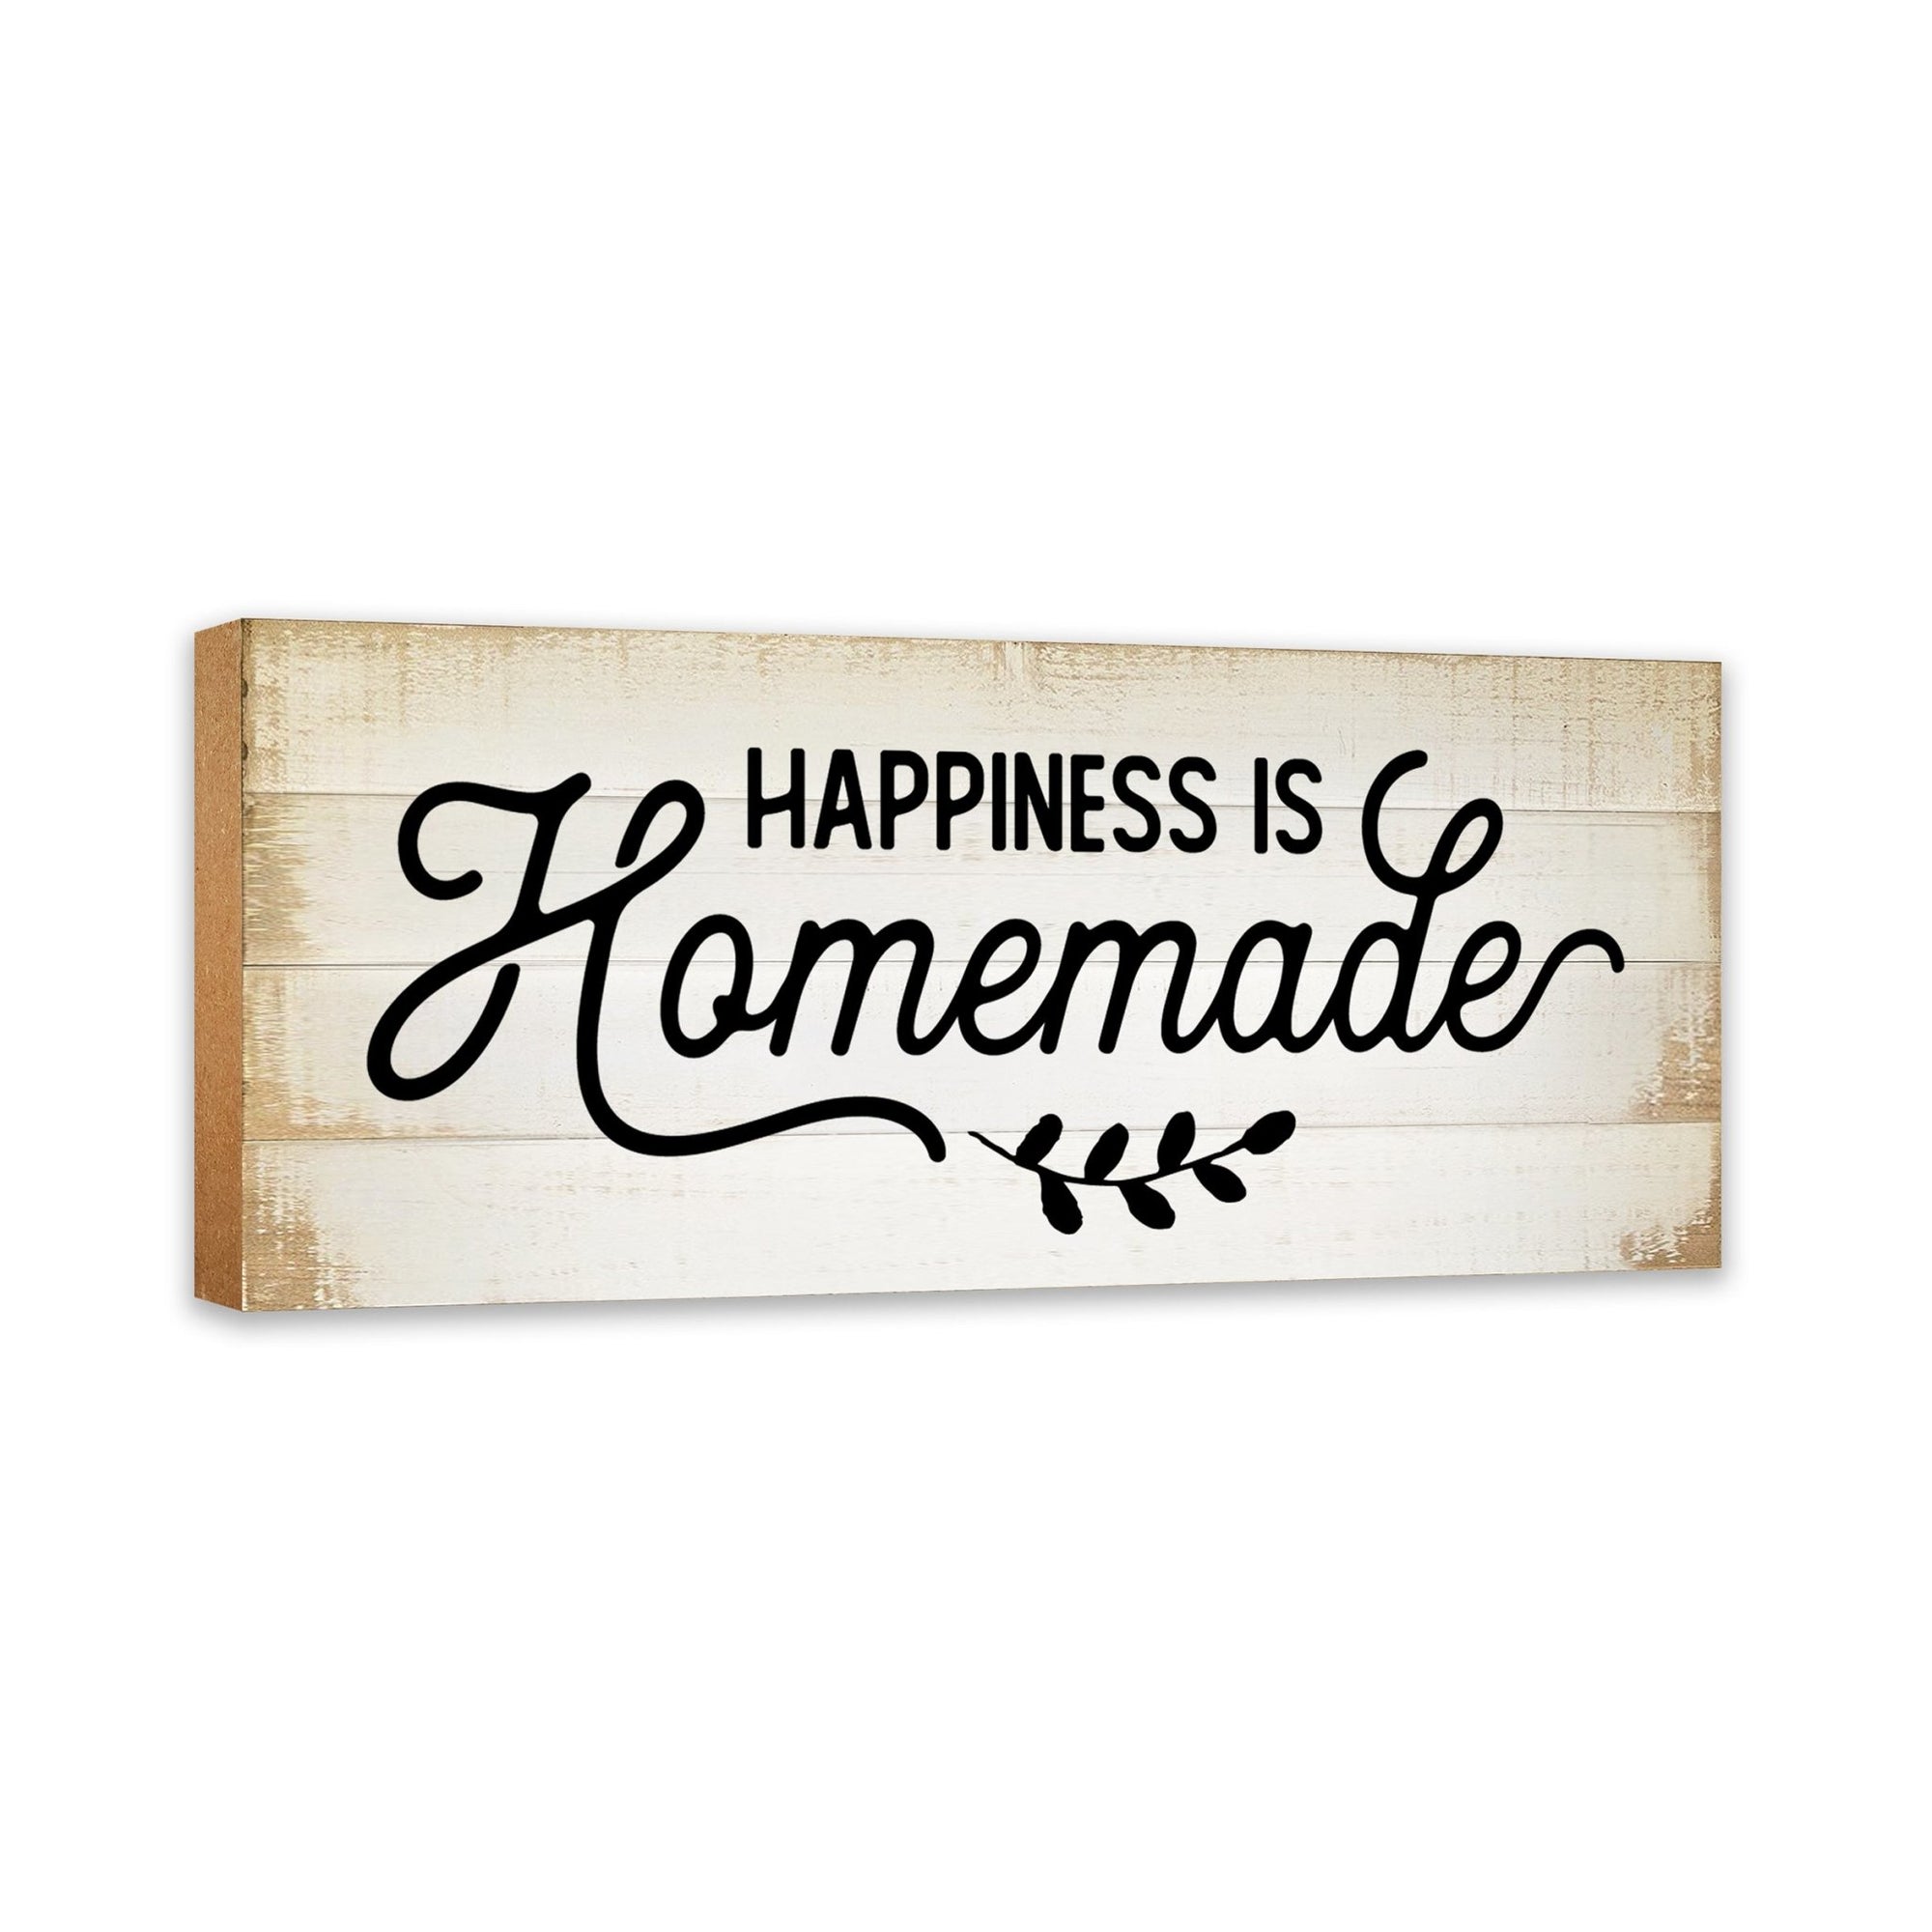 Inspirational Wooden Wall Hanging Plaque Kitchen Home Décor For All Season Decoration Happiness Is Homemade 